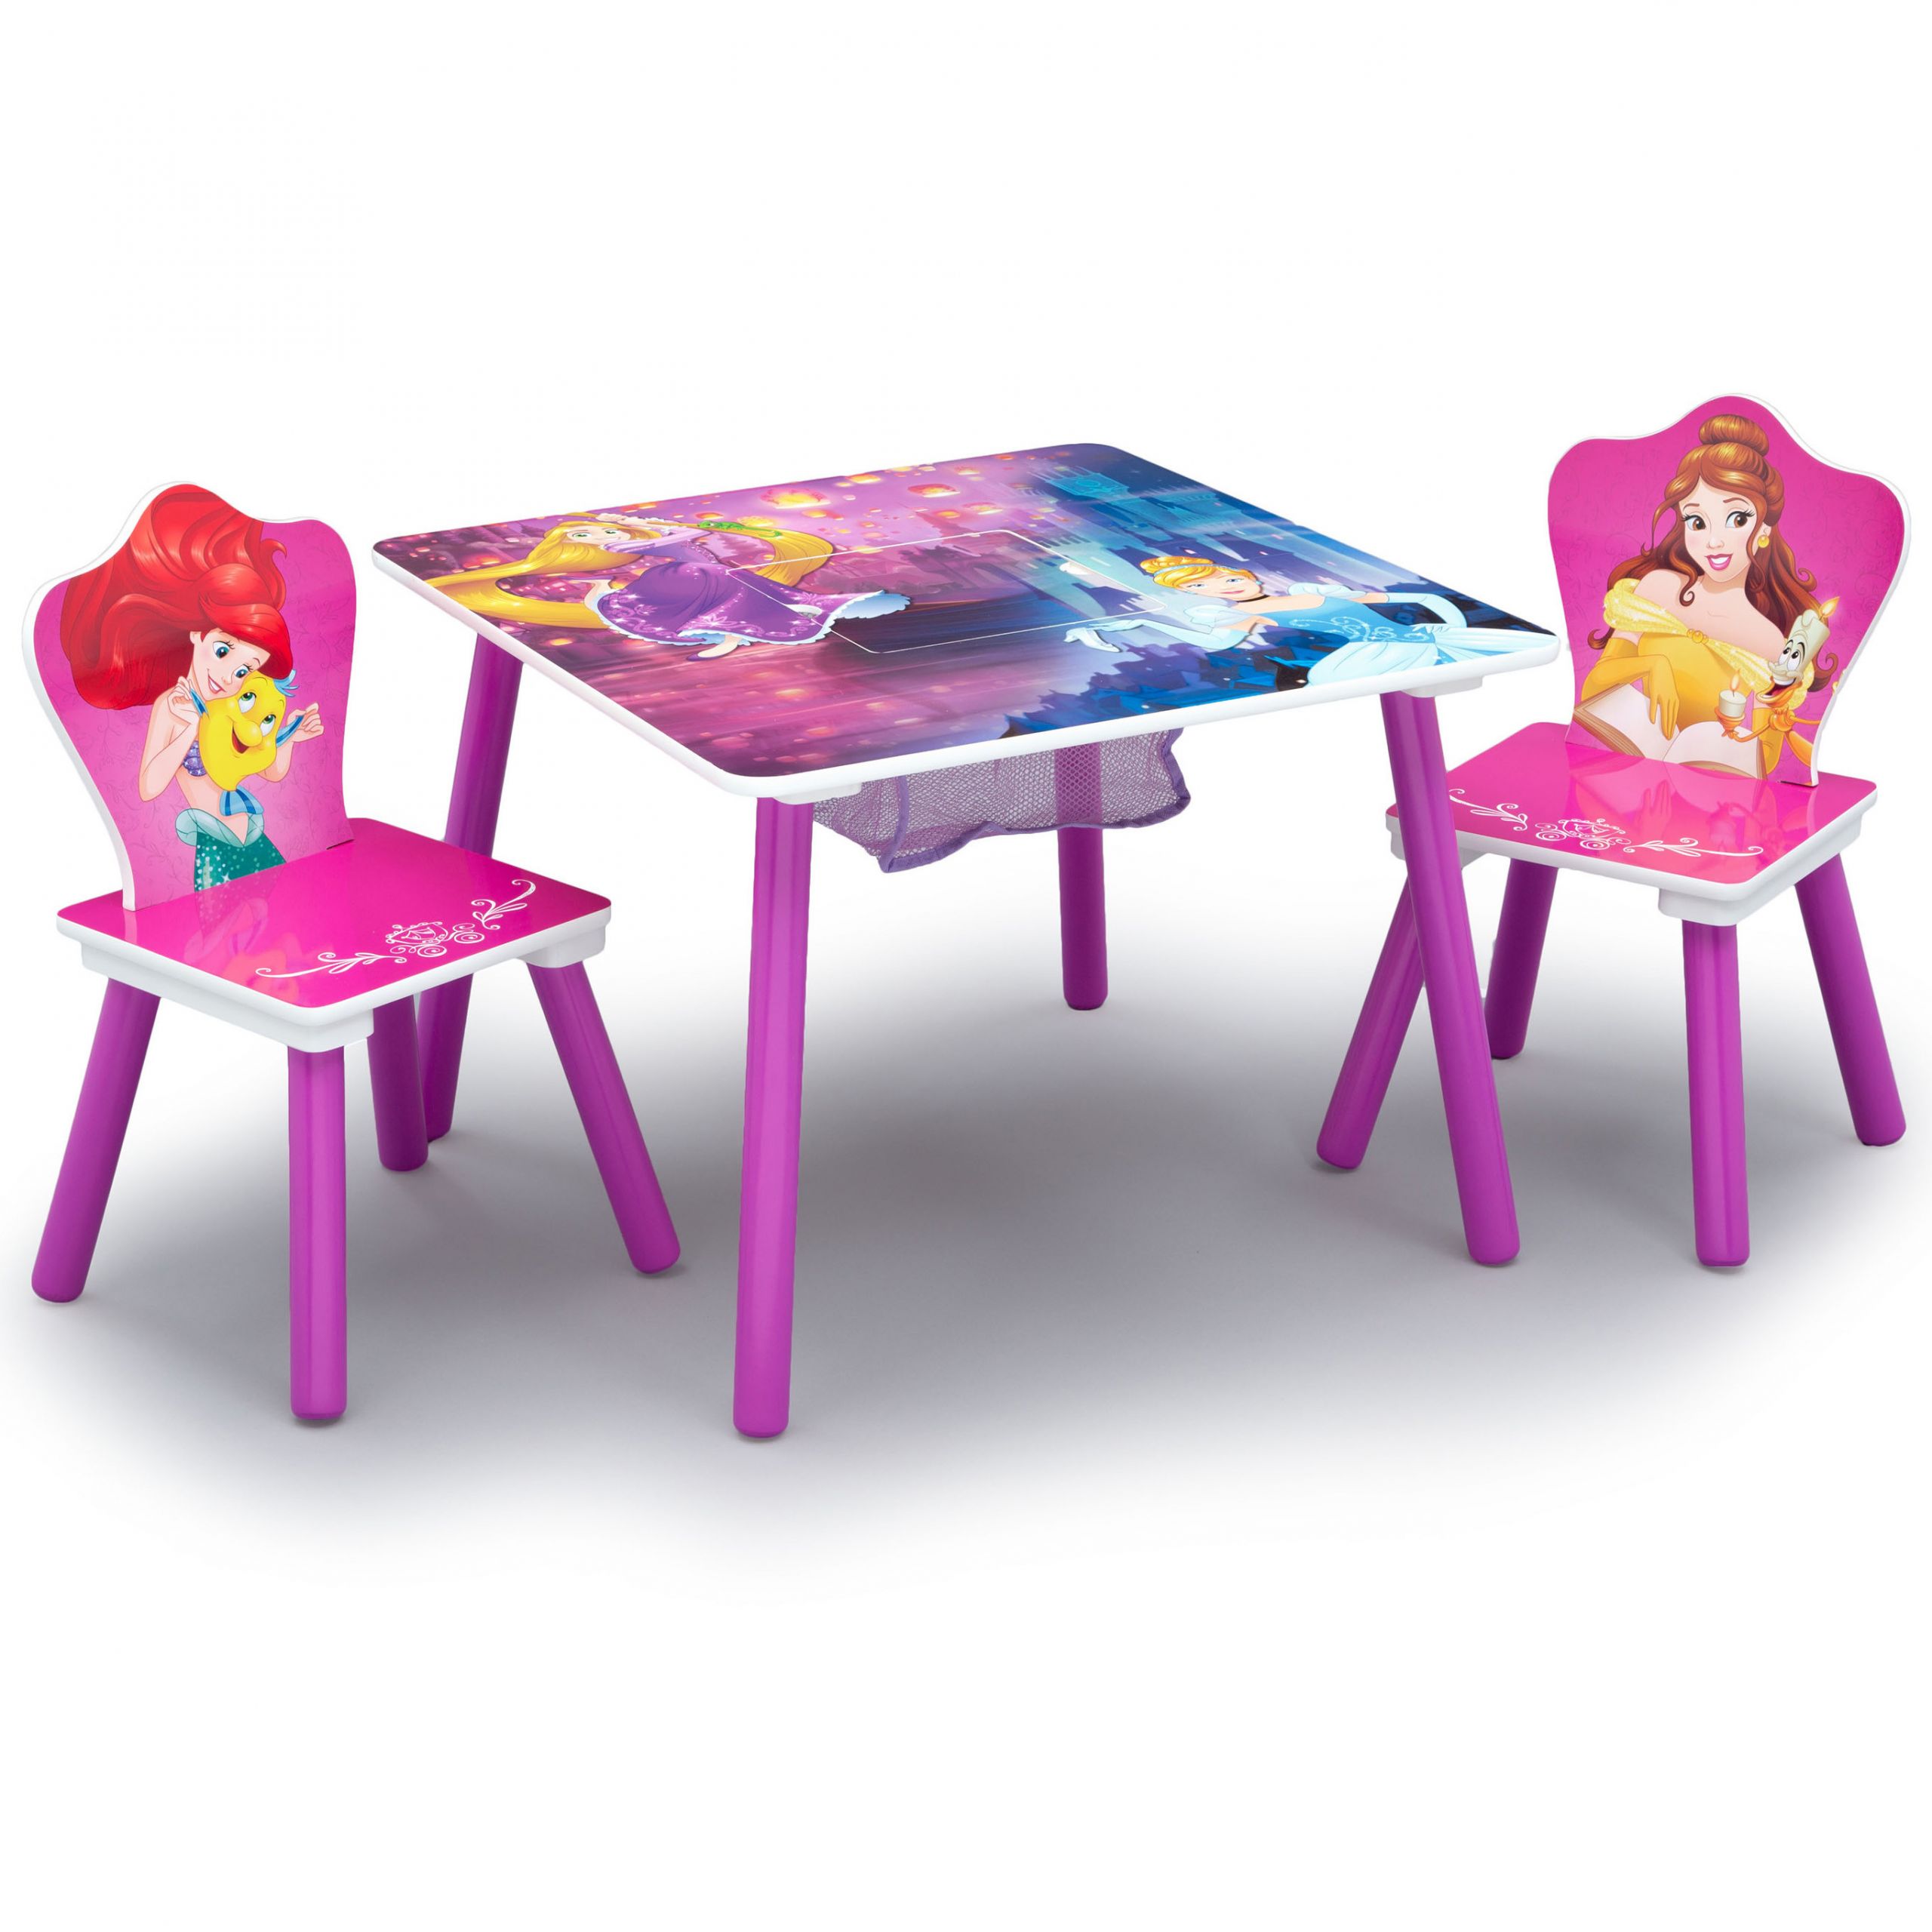 Kids Table And Chairs Walmart
 Disney Princess Wood Kids Storage Table and Chairs Set by